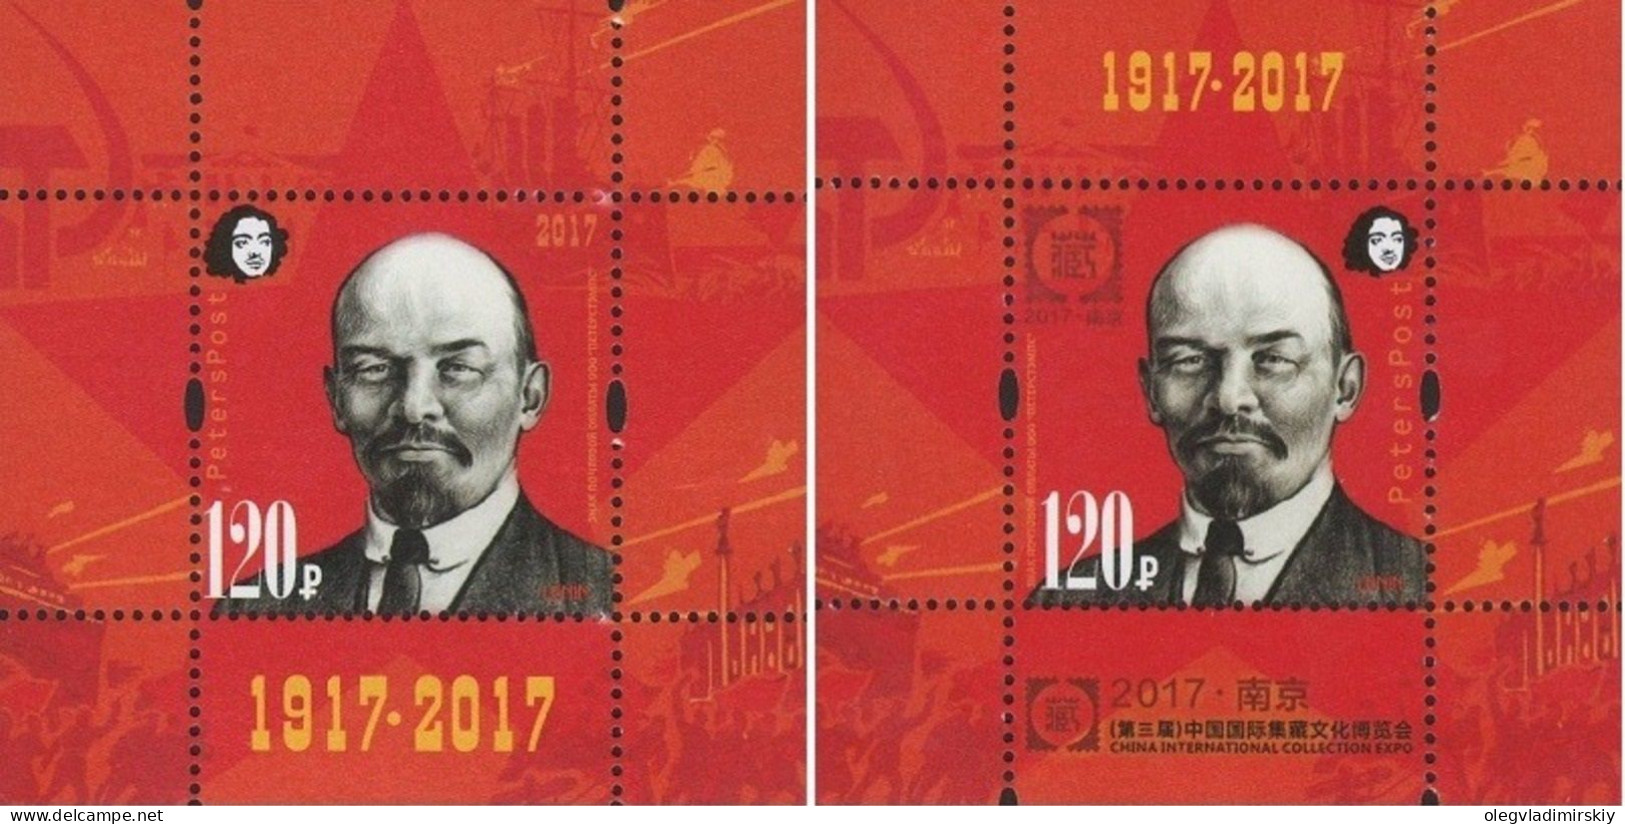 Russia 2017 100 Ann Of Great Russian Revolution 1917-2017 Lenin Exhibition China EXPO-2017 Peterspost Set Of 2 Block's - Lenin